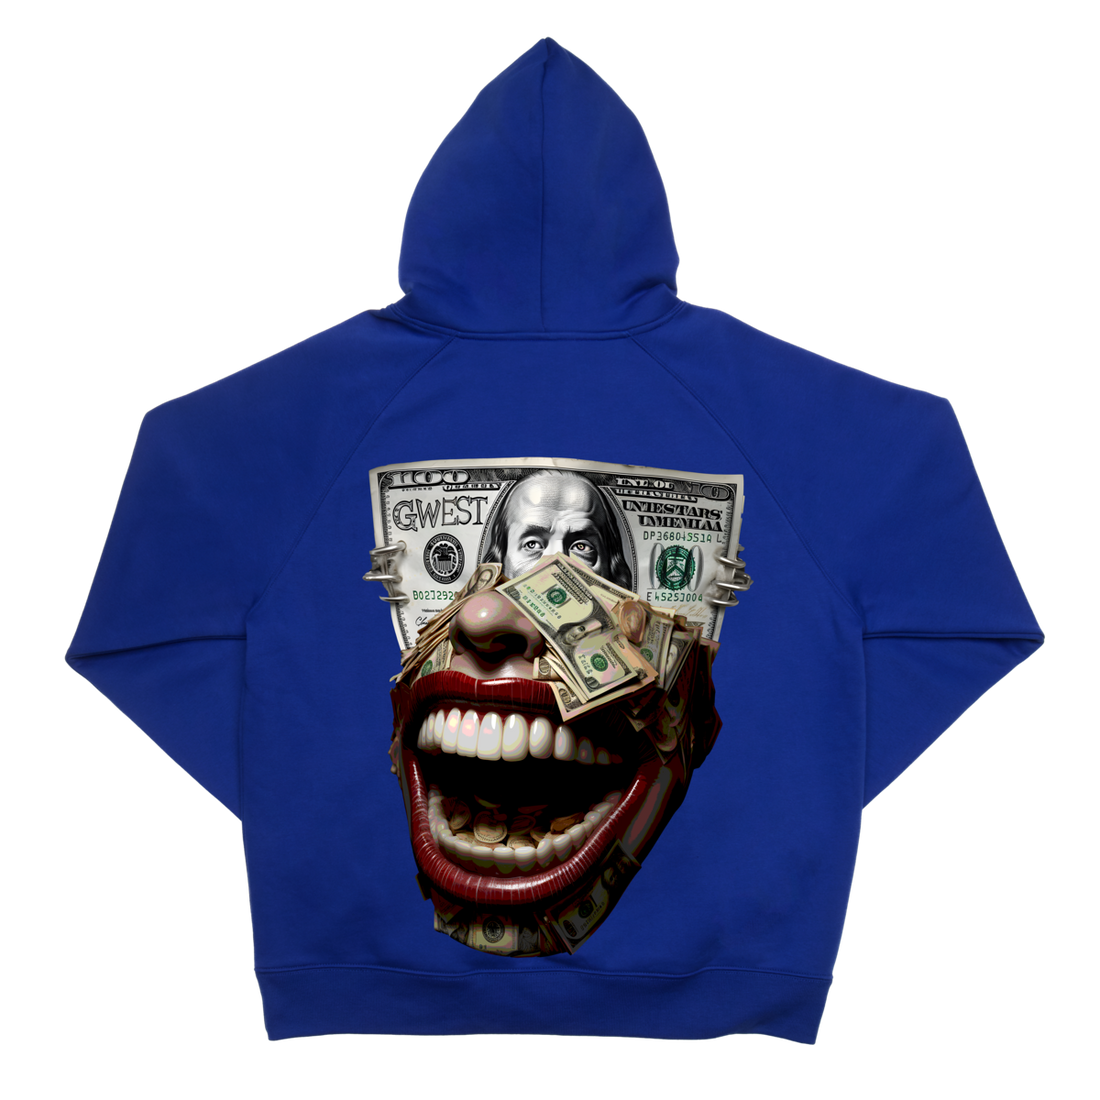 G WEST MONEY MOUTH HOODIE - ROYAL BLUE